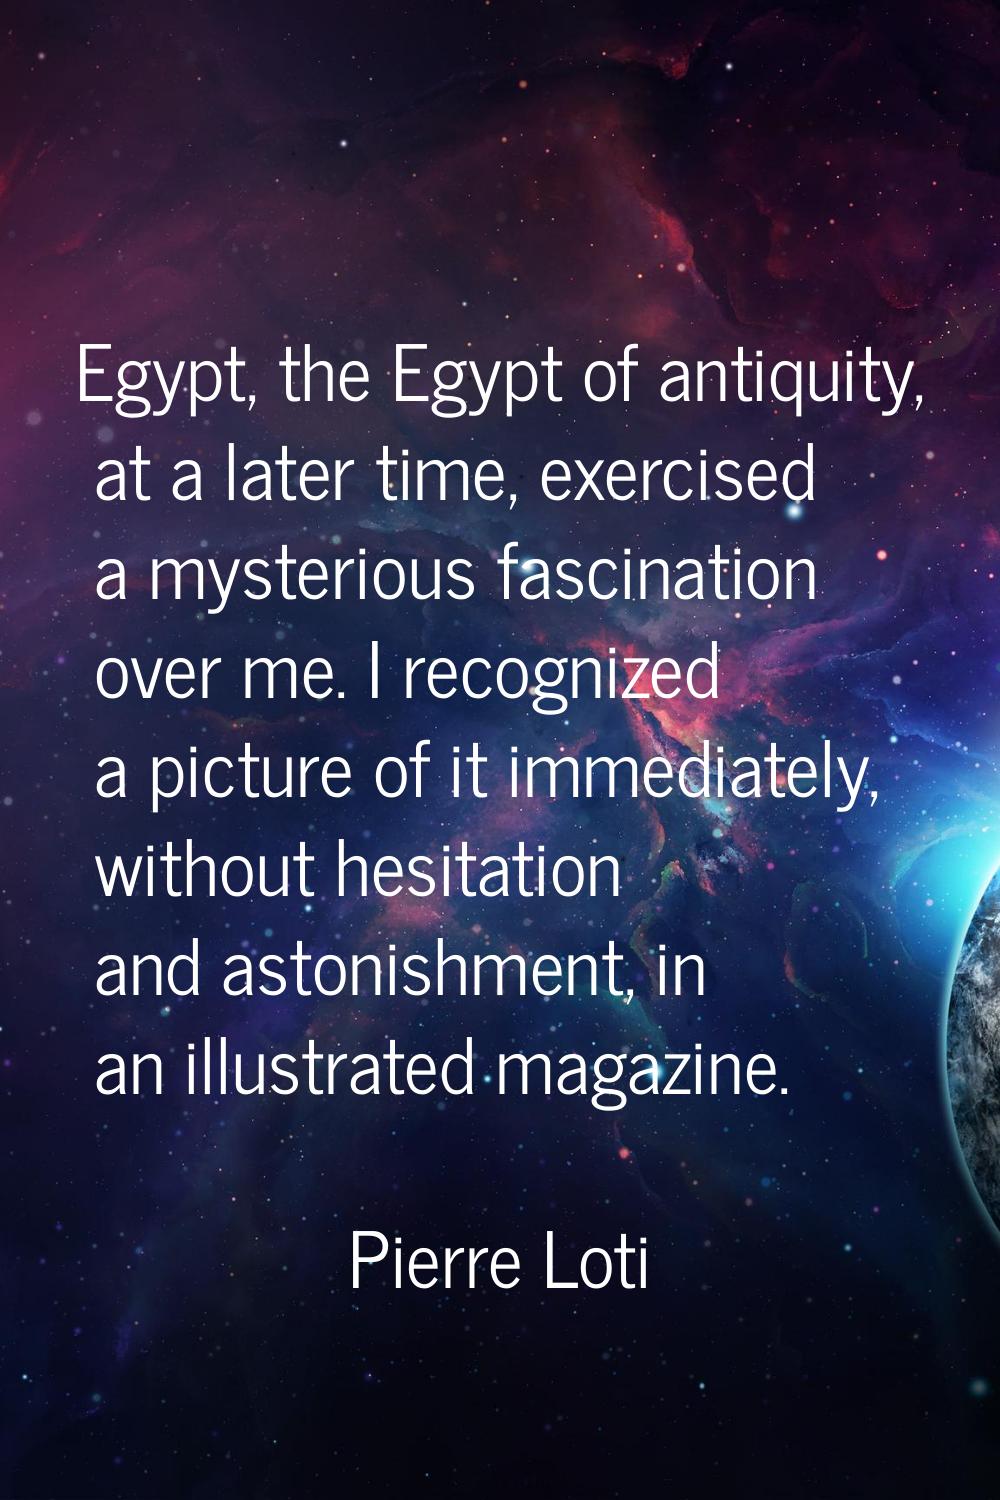 Egypt, the Egypt of antiquity, at a later time, exercised a mysterious fascination over me. I recog